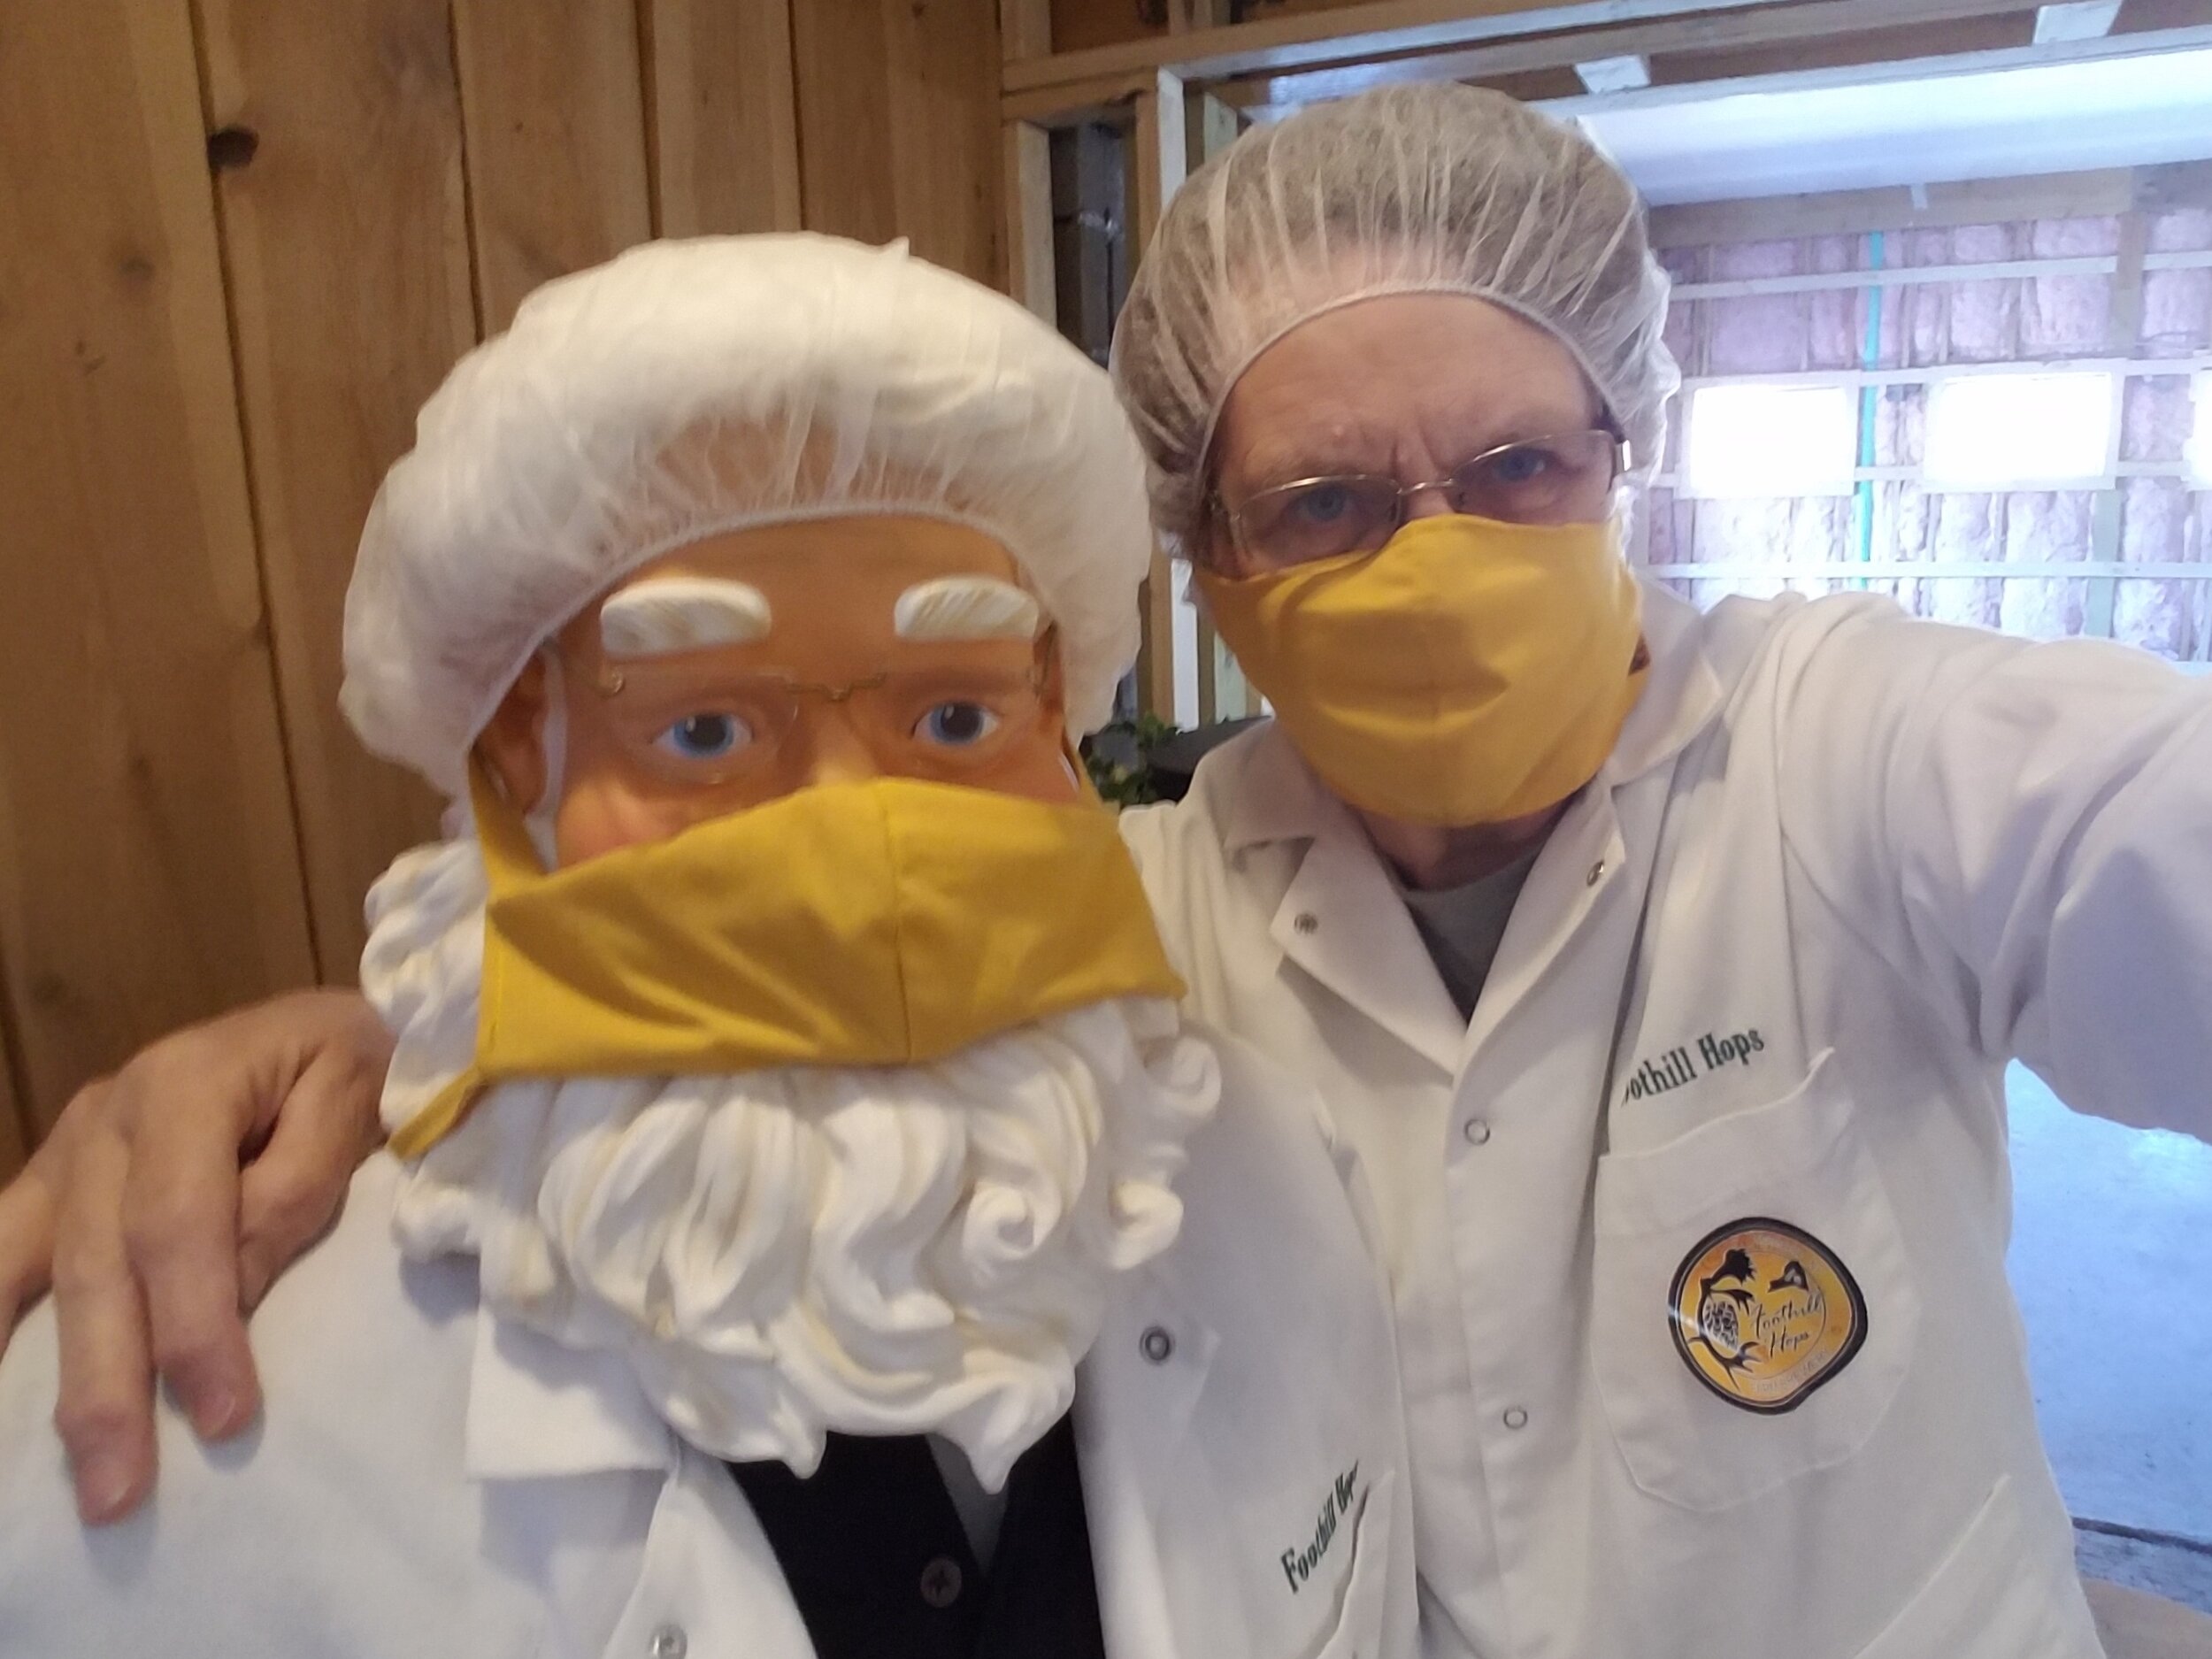 Animated Santa figure and female brewery owner wearing facemask, hairnet and chef's coats.